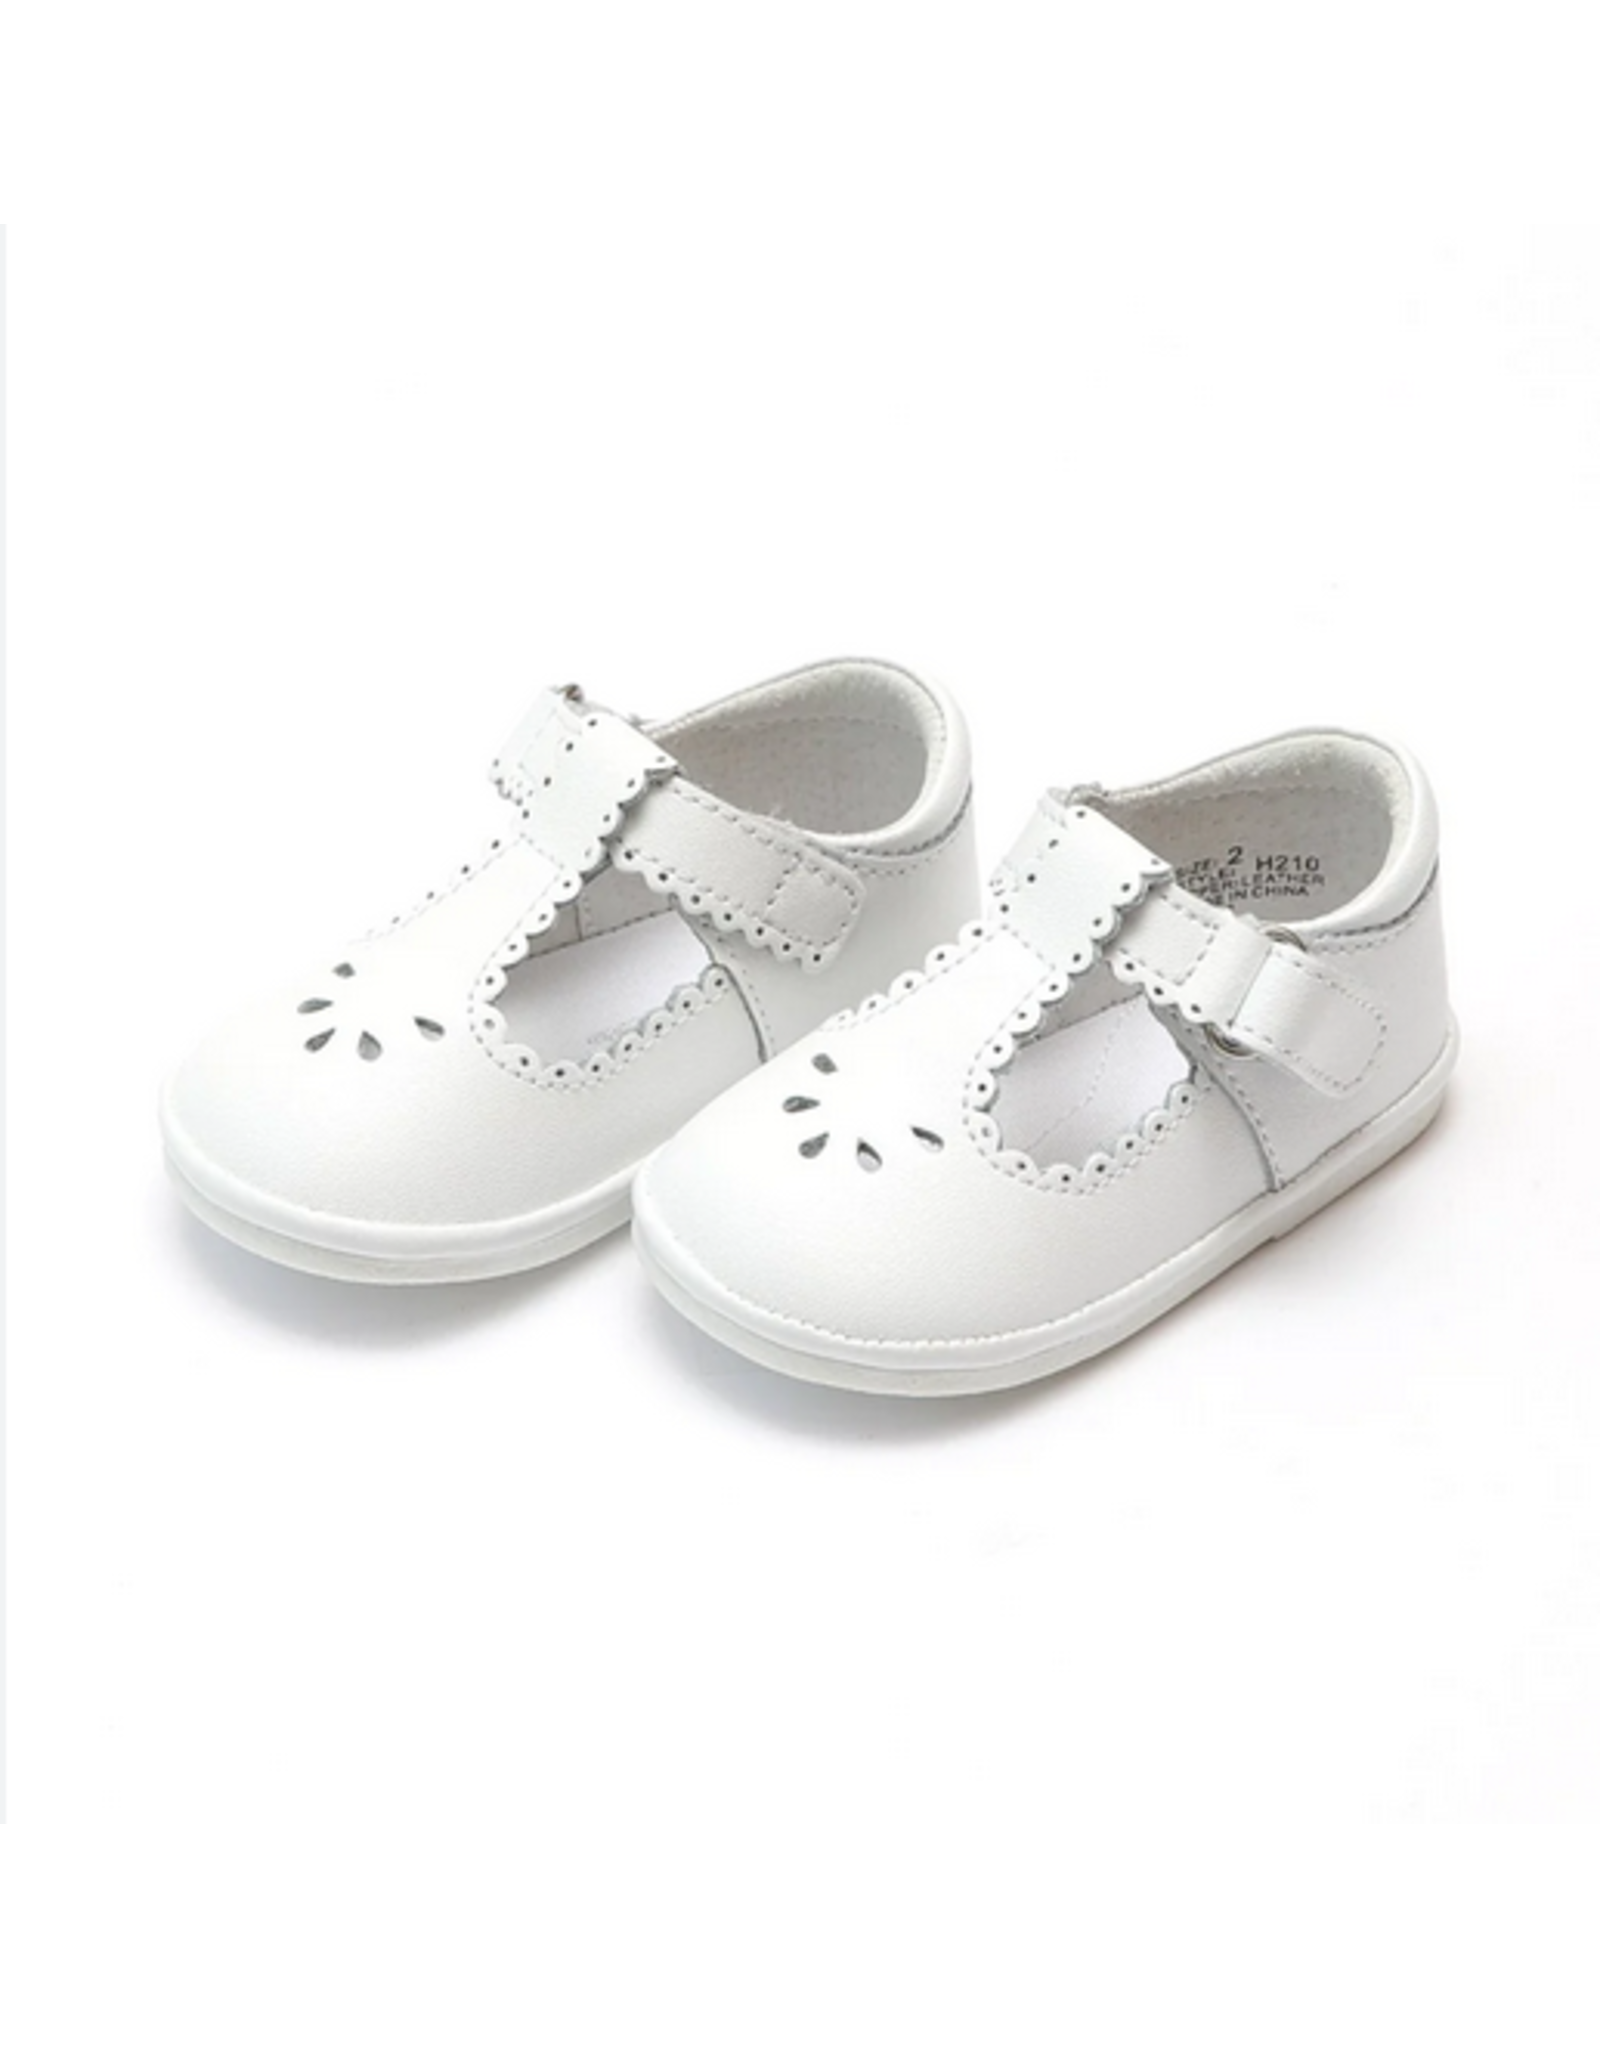 Angel Baby Shoes Infant Dottie Scalloped Perforated Mary Jane Gray